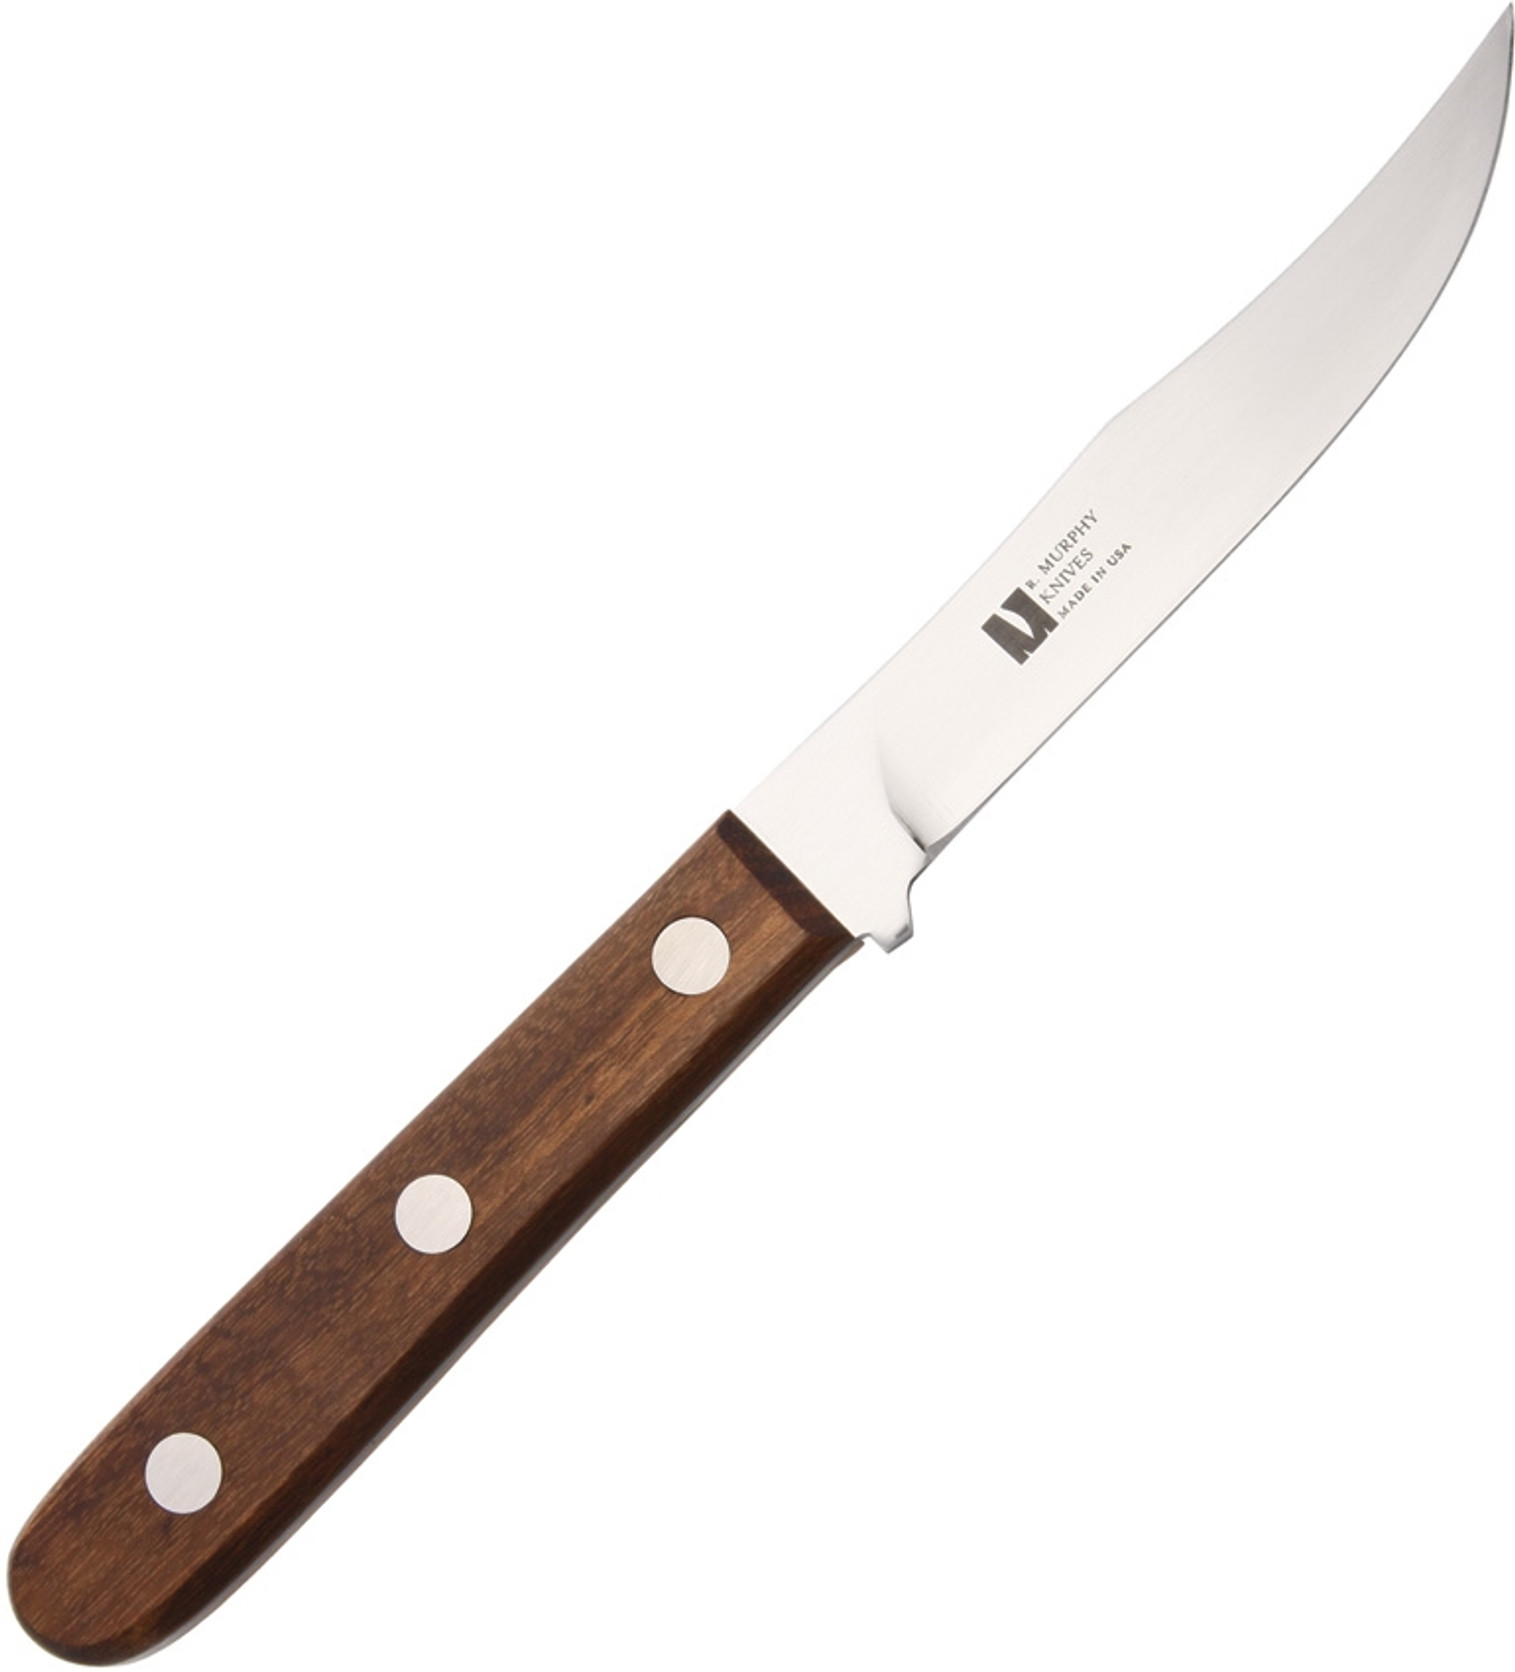 The Hunter Carbon Steel